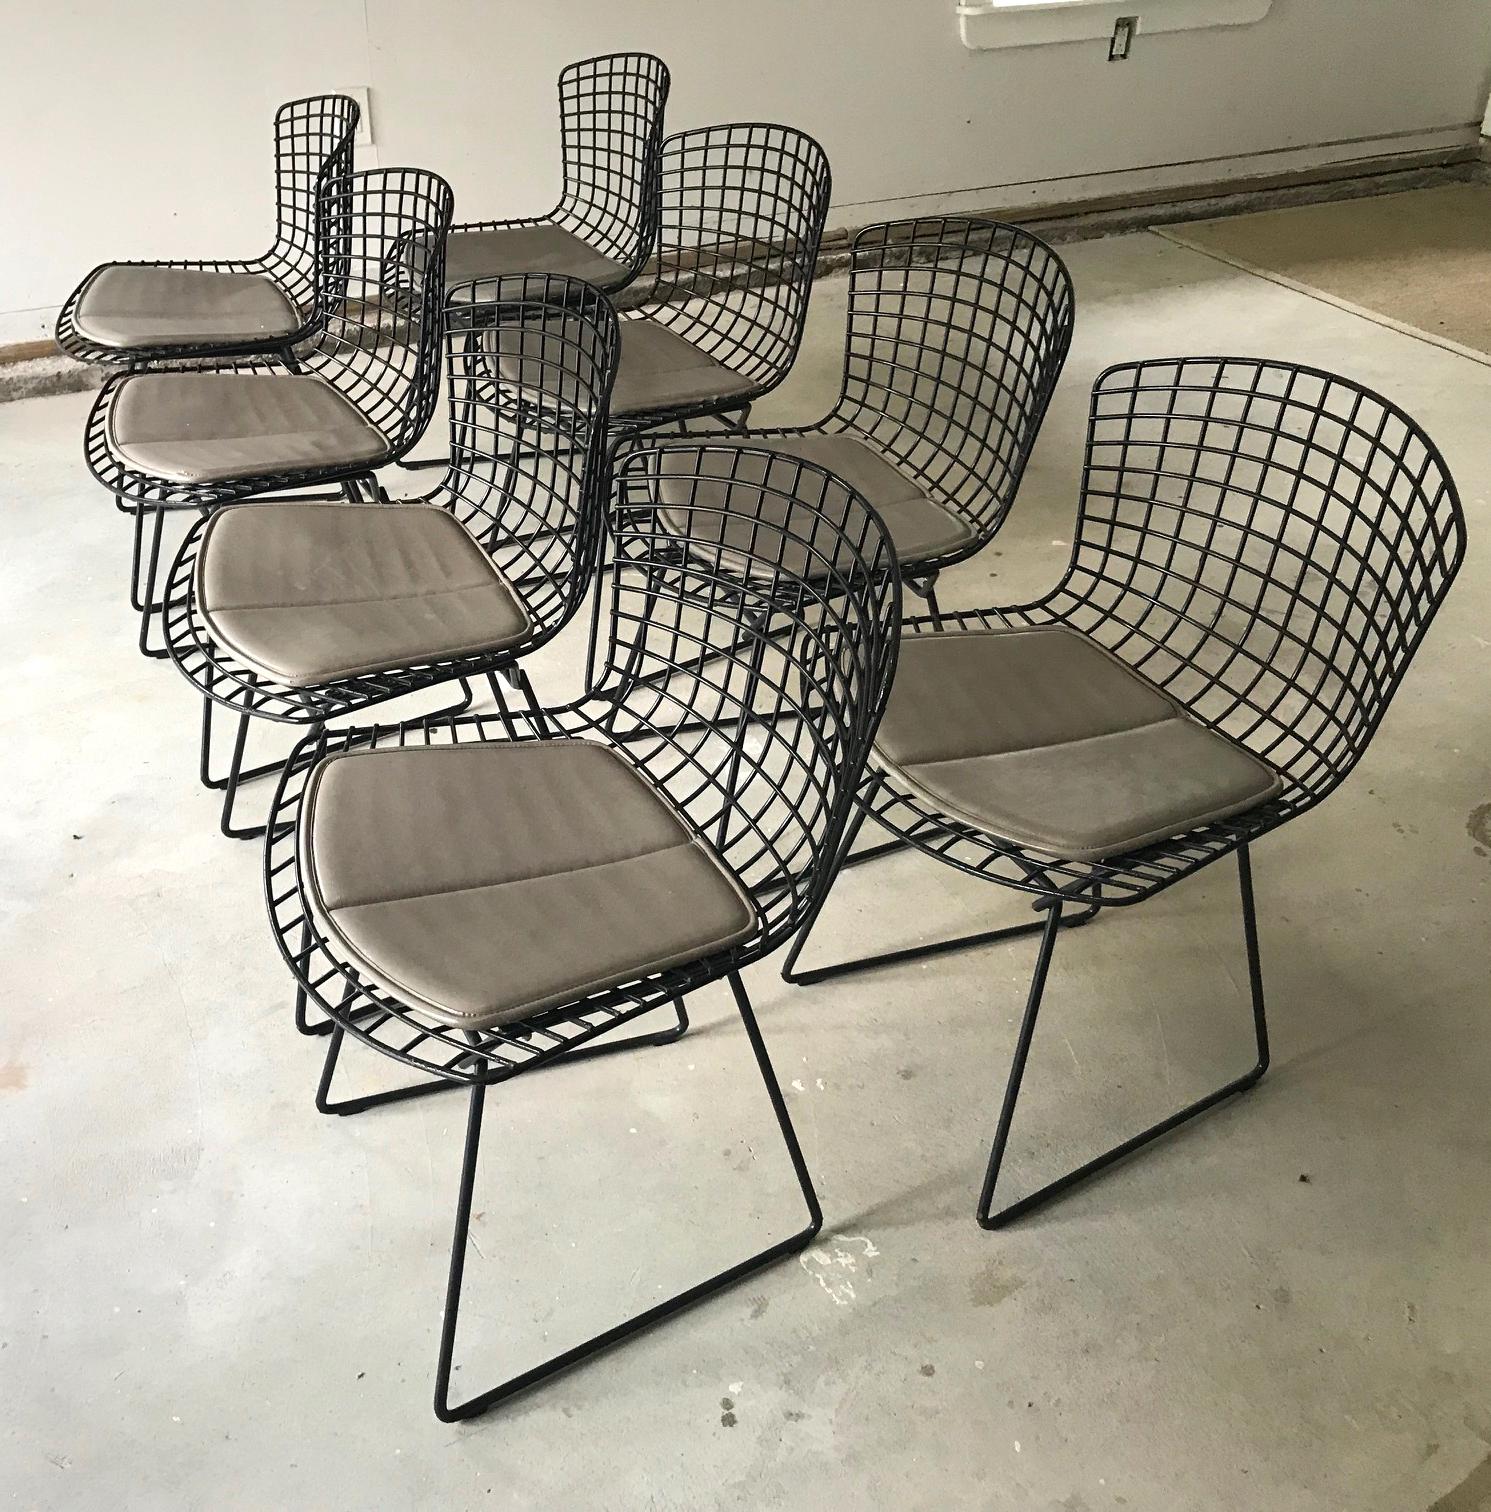 A nice set of vintage metal wire chair designed by Harry Bertoia for Knoll in 1952. One of the iconic American midcentury design that emphasizes functions as well as sculptural form. In black enamel metal with pads in grey vinyl.